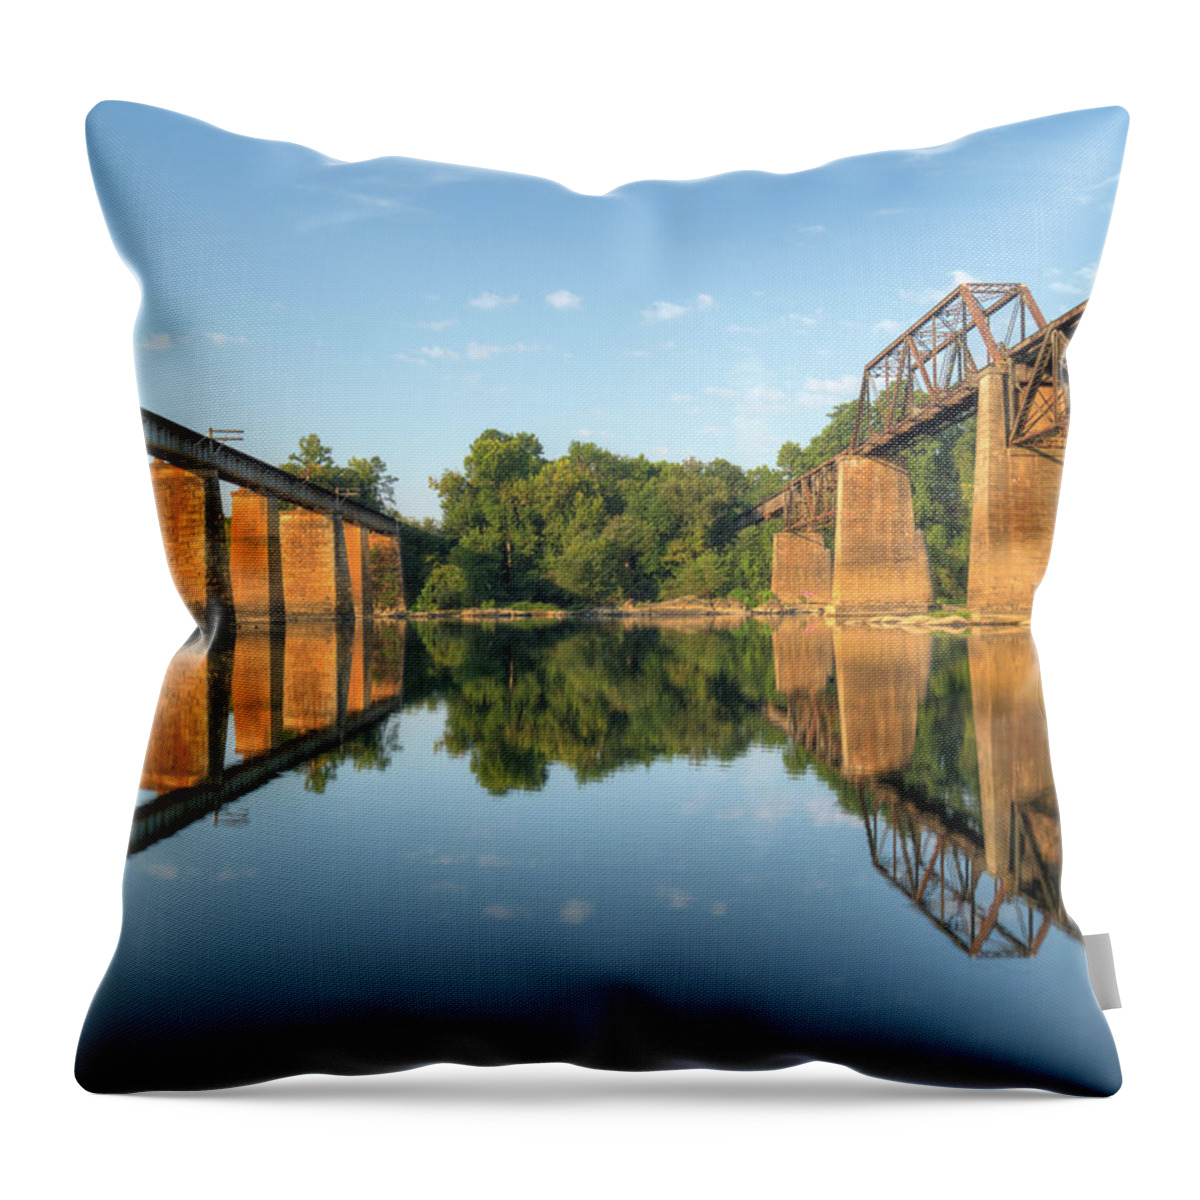 2010 Throw Pillow featuring the photograph Brickworks 14 by Charles Hite